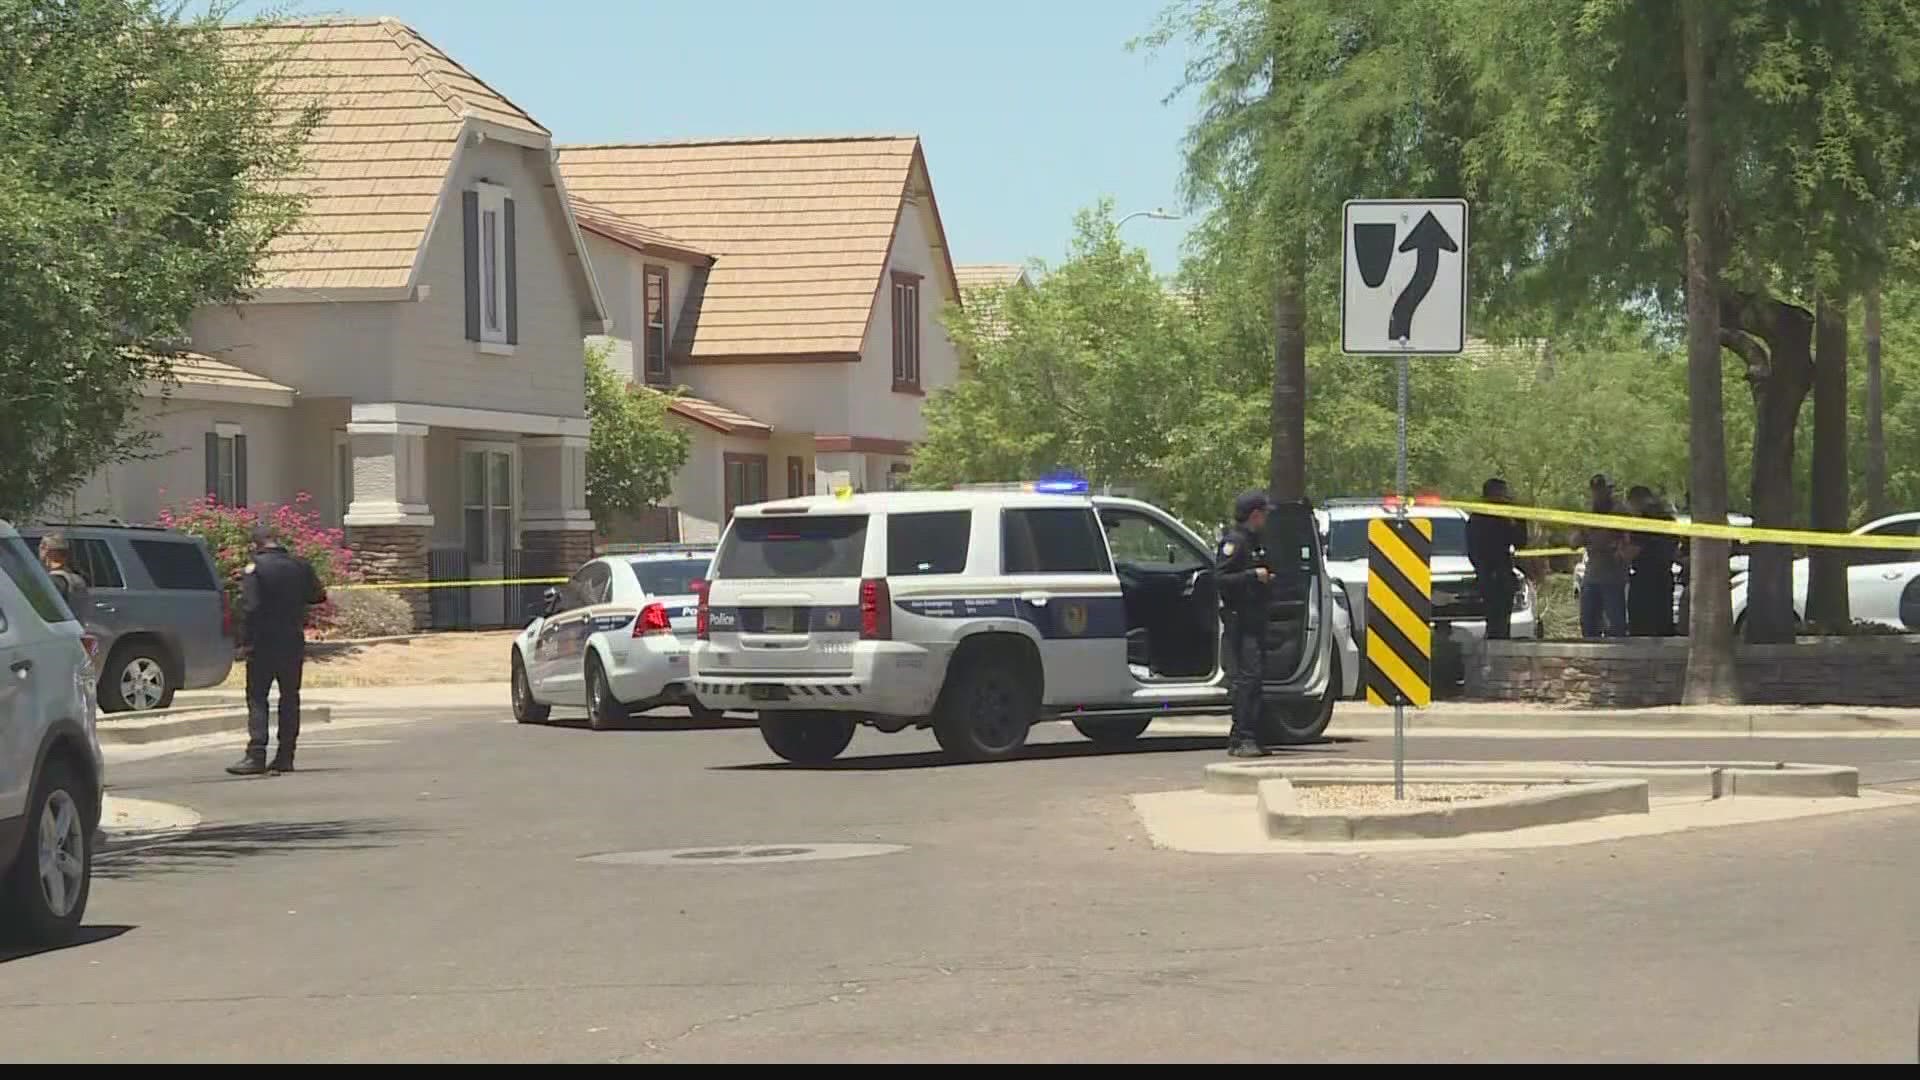 A Phoenix police officer who has been on the force for 19 years is recovering after being ambushed in a surprise attack. Two men were arrested for attempted murder.